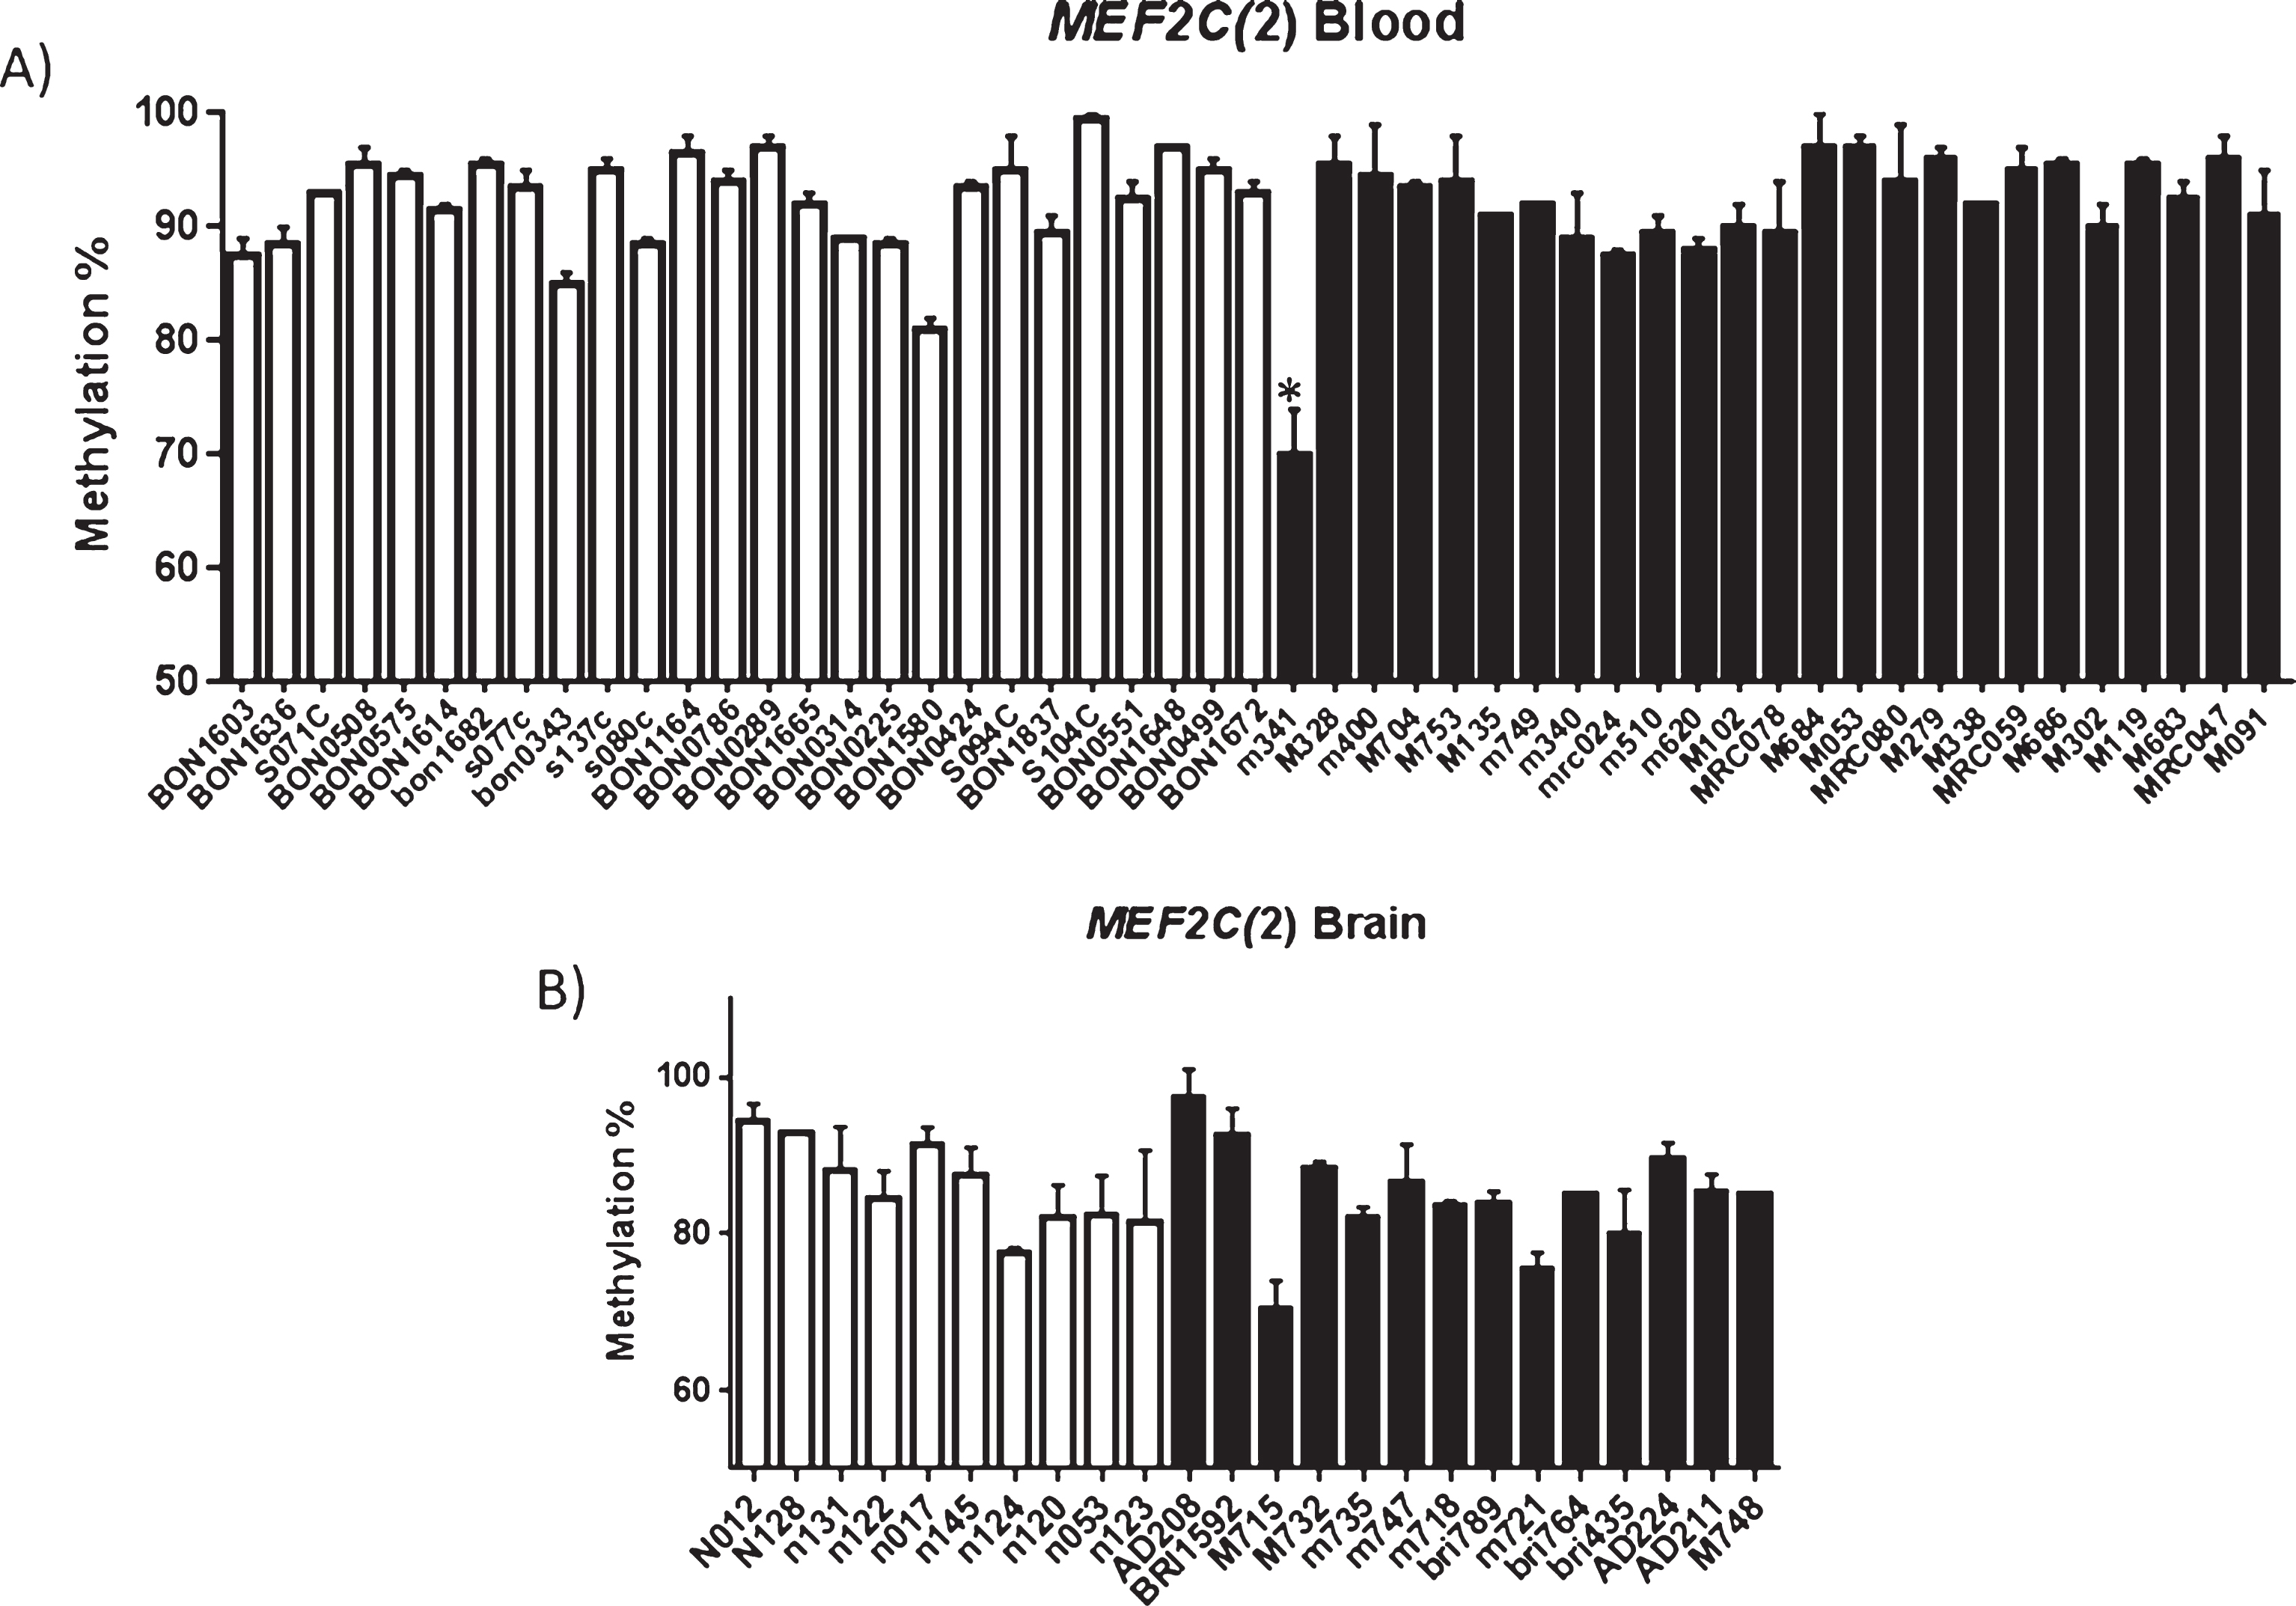 (A) Methylation profiling identifies rare individual AD hypomethylation of the upstream MEF2C CpG site. Patient sample M341 showed statistically significant difference in methylation (p = 2.0E-10) when compared to other blood samples (A), statistical significance was not observed for patient M715 in brain (B). A) Shows average methylation at the CpG investigated in each sample investigated (average of at least two runs). Controls are shown in white and AD samples in black. Error bars represent the S.E.M. Control blood = 26, AD blood n = 25, control brain n = 10, AD brain n = 14; Male brain n = 10, Female brain n = 14, Male blood n = 29 0, Female blood n = 22.